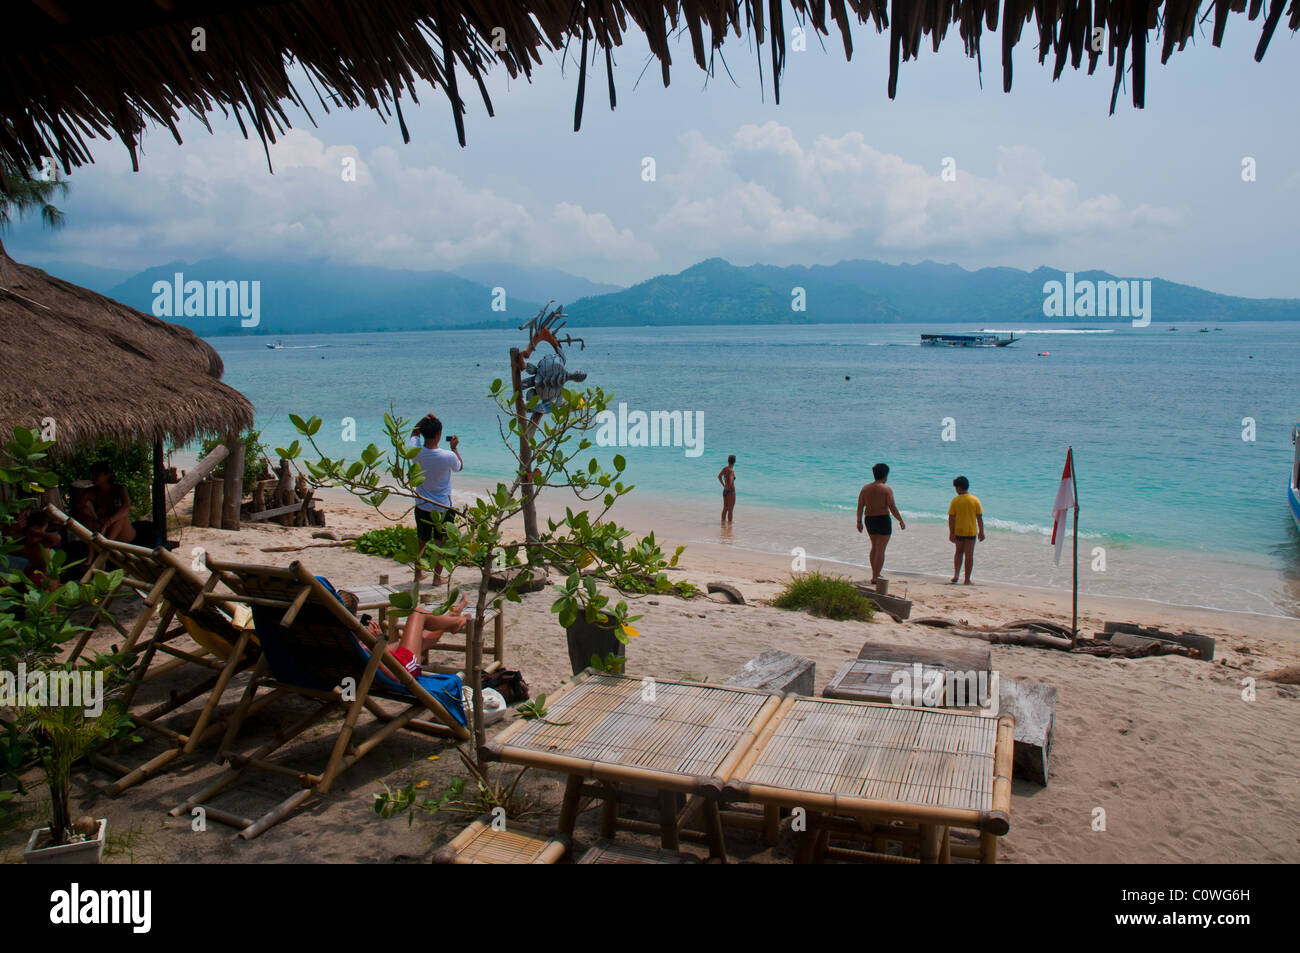 Beach at Gili Air the smallest island of the Gili group off Lombok Indonesia Stock Photo